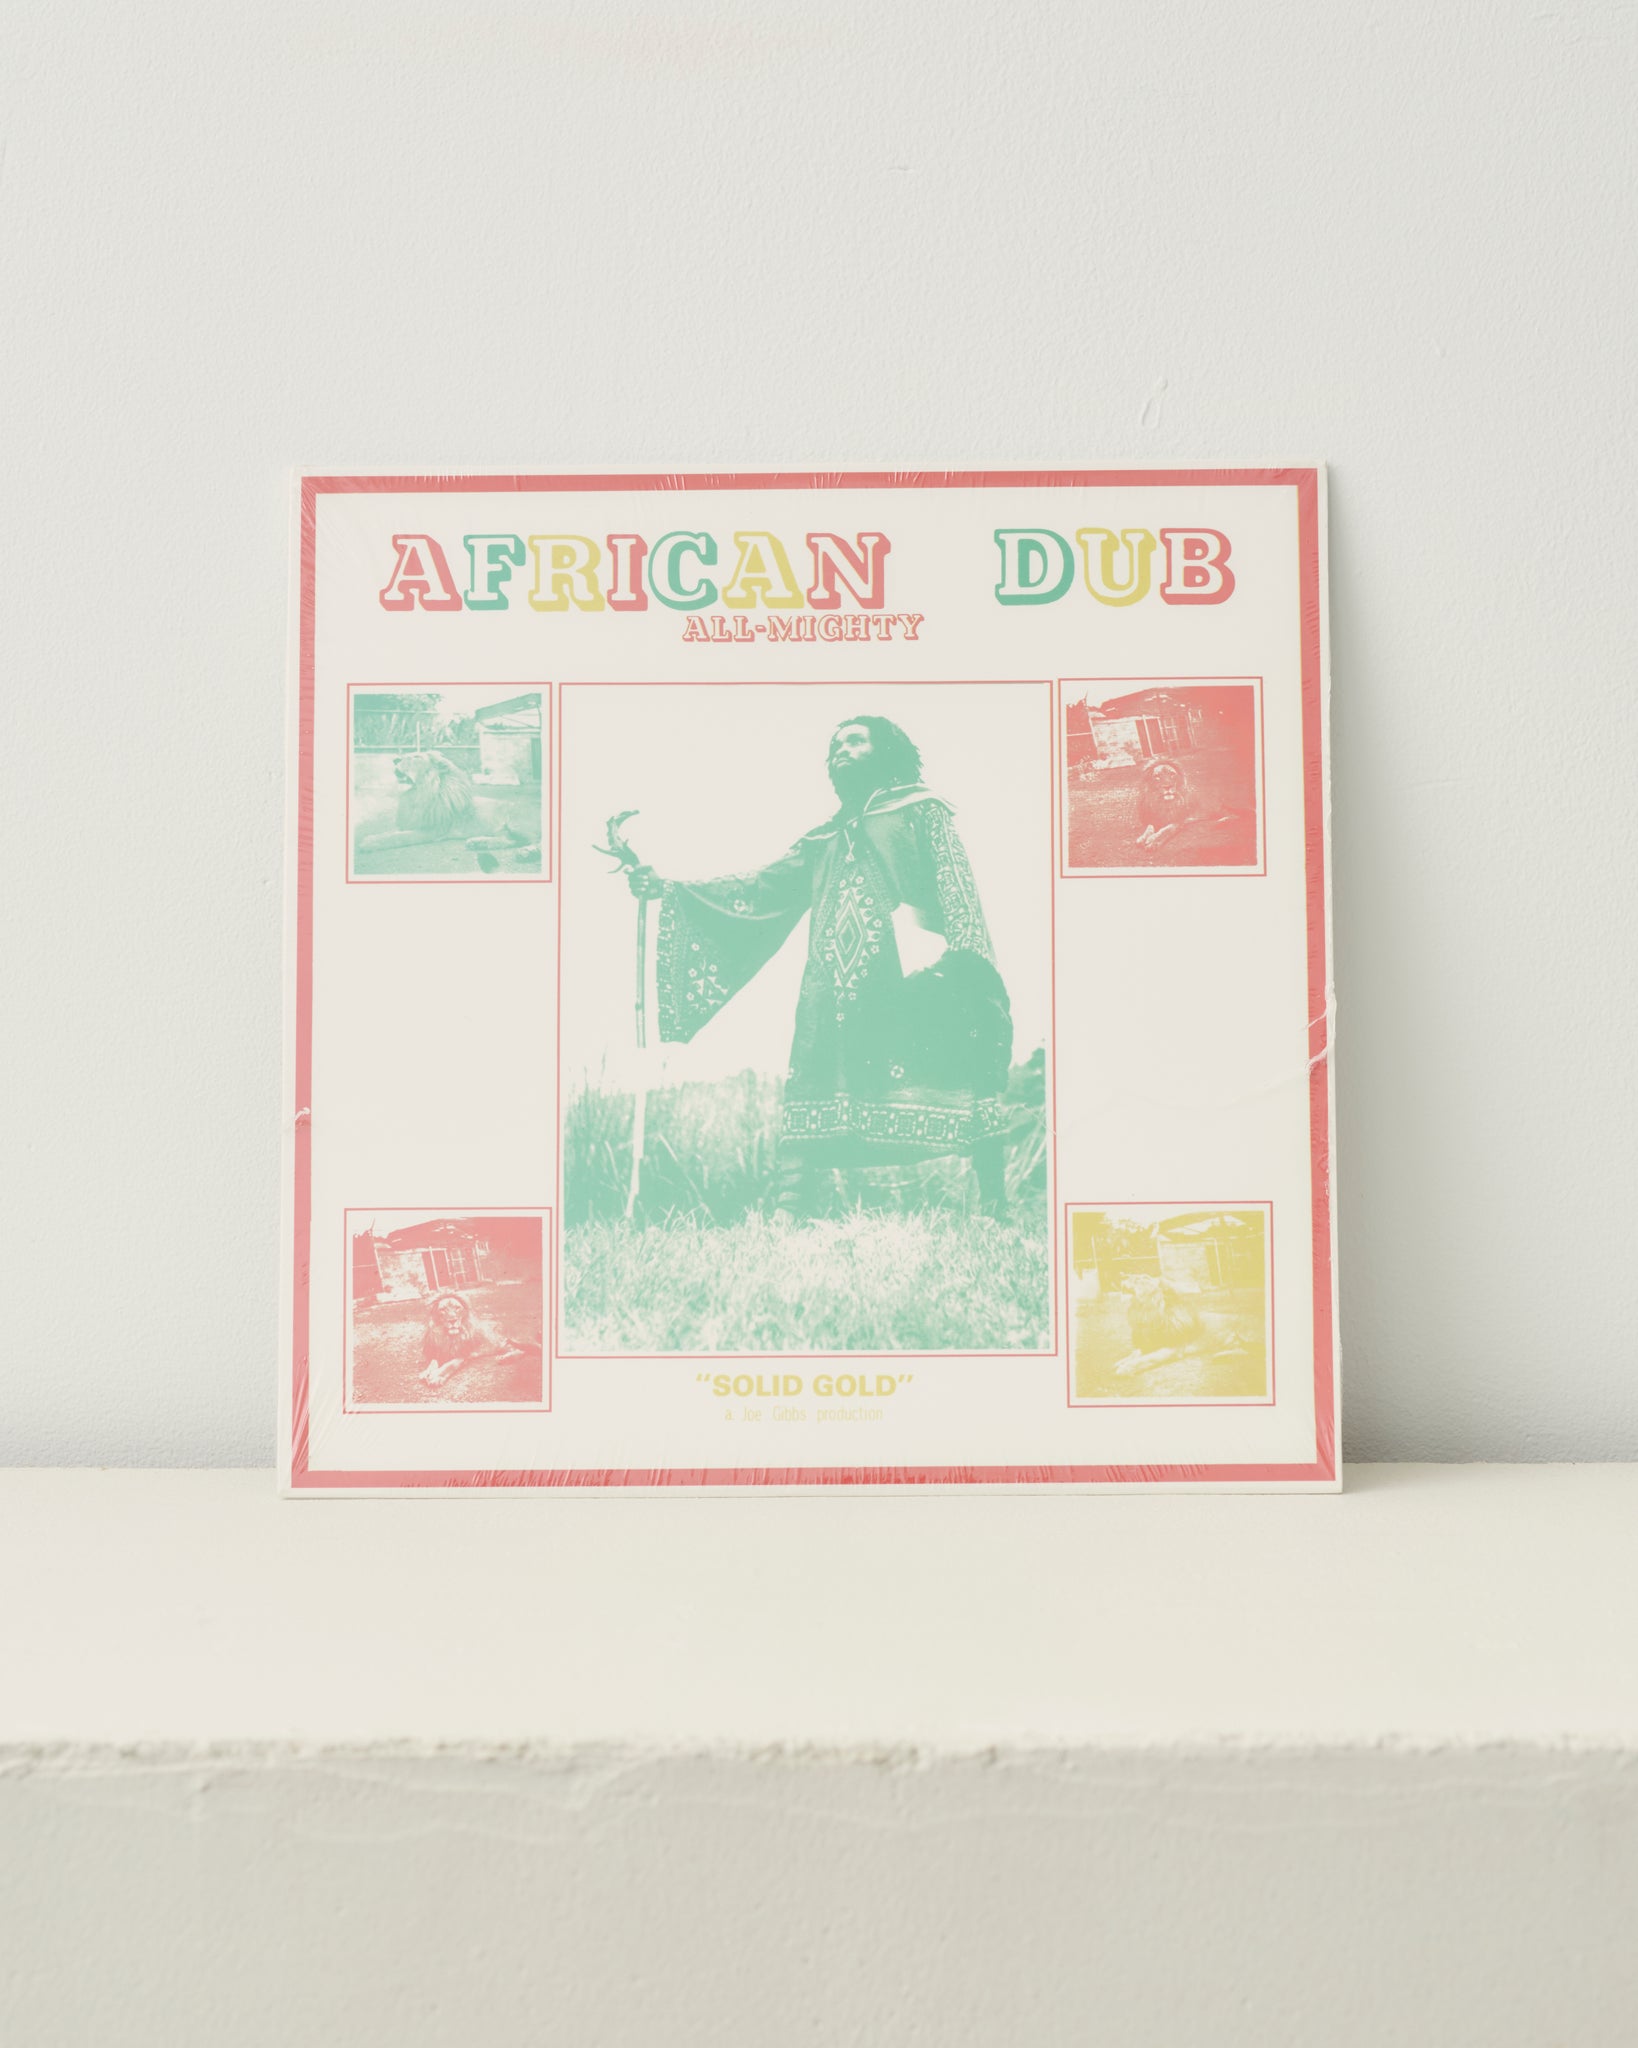 Joe Gibbs & The Professionals, African Dub All-Mighty Chapter 1